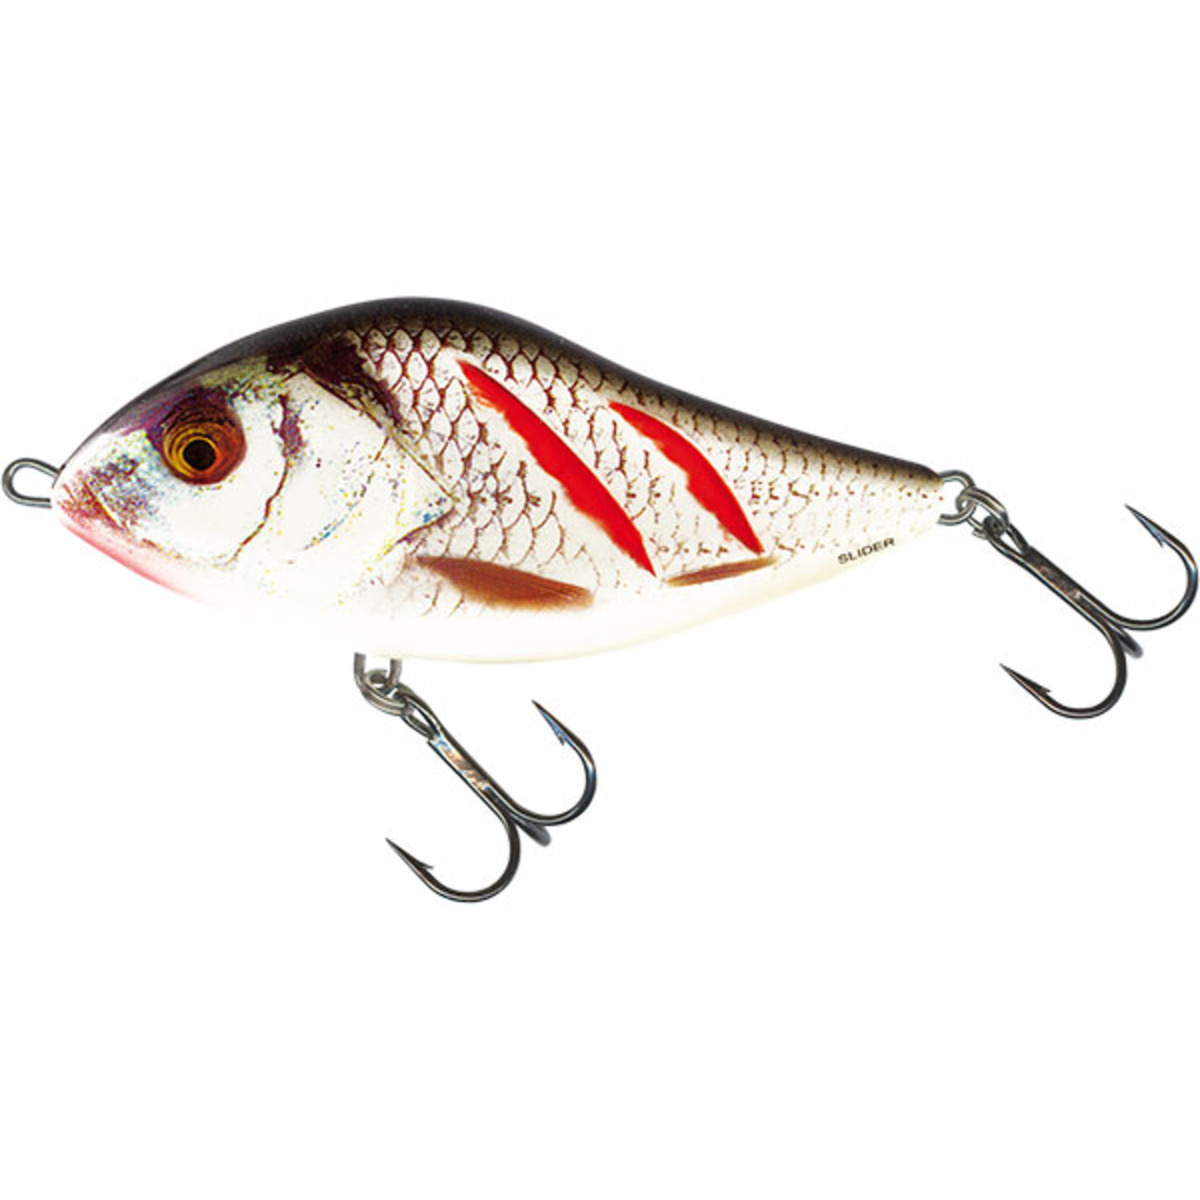 Salmo Slider Sinking - 10 Cm - Wounded Real Grey Shiner